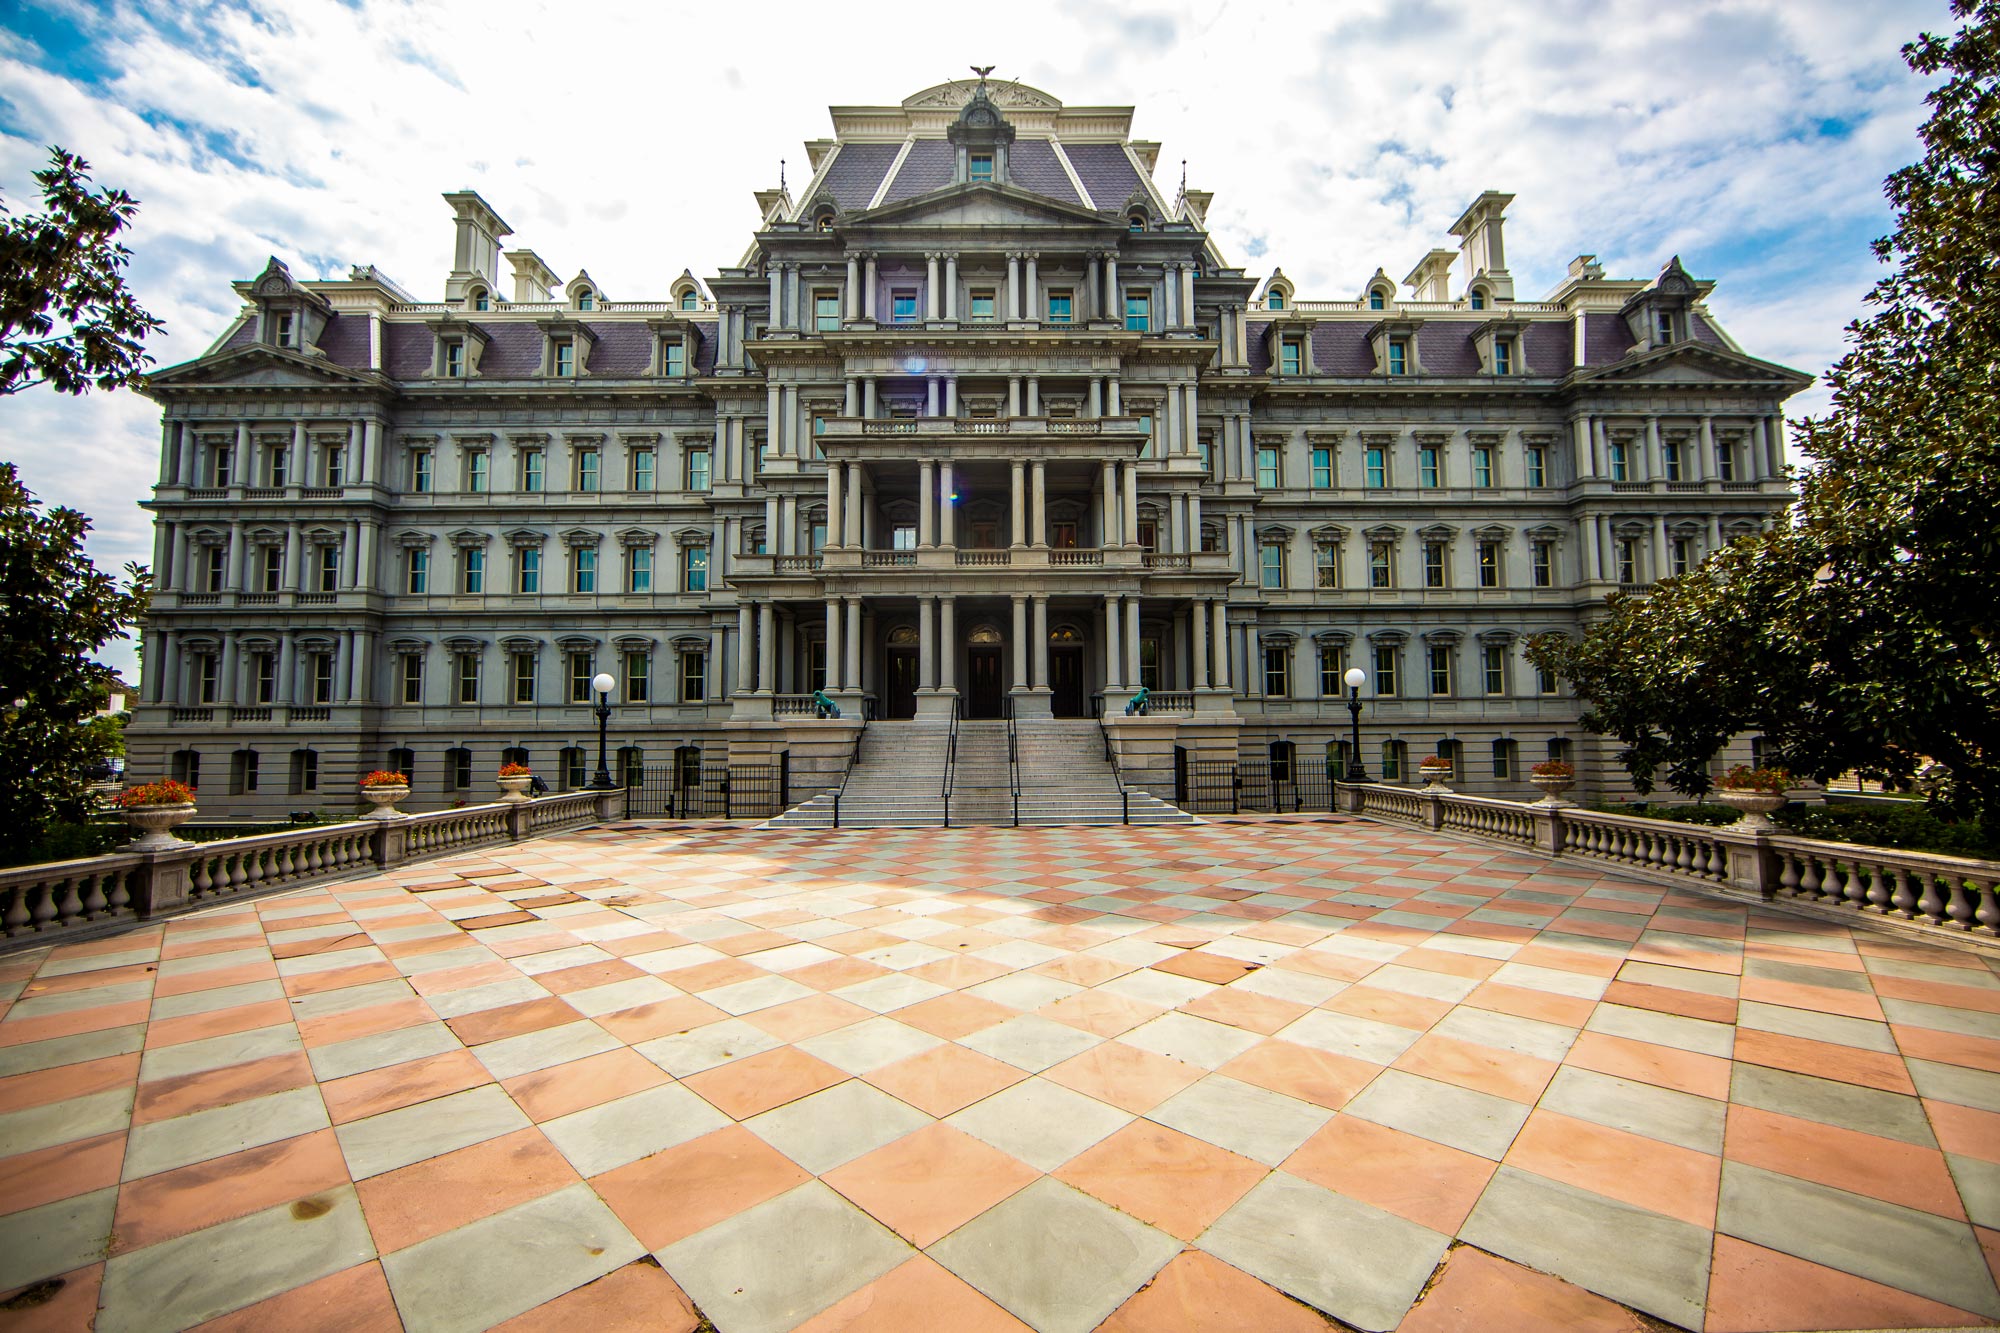 Entrance of the 5 story Eisenhower Executive Office Building